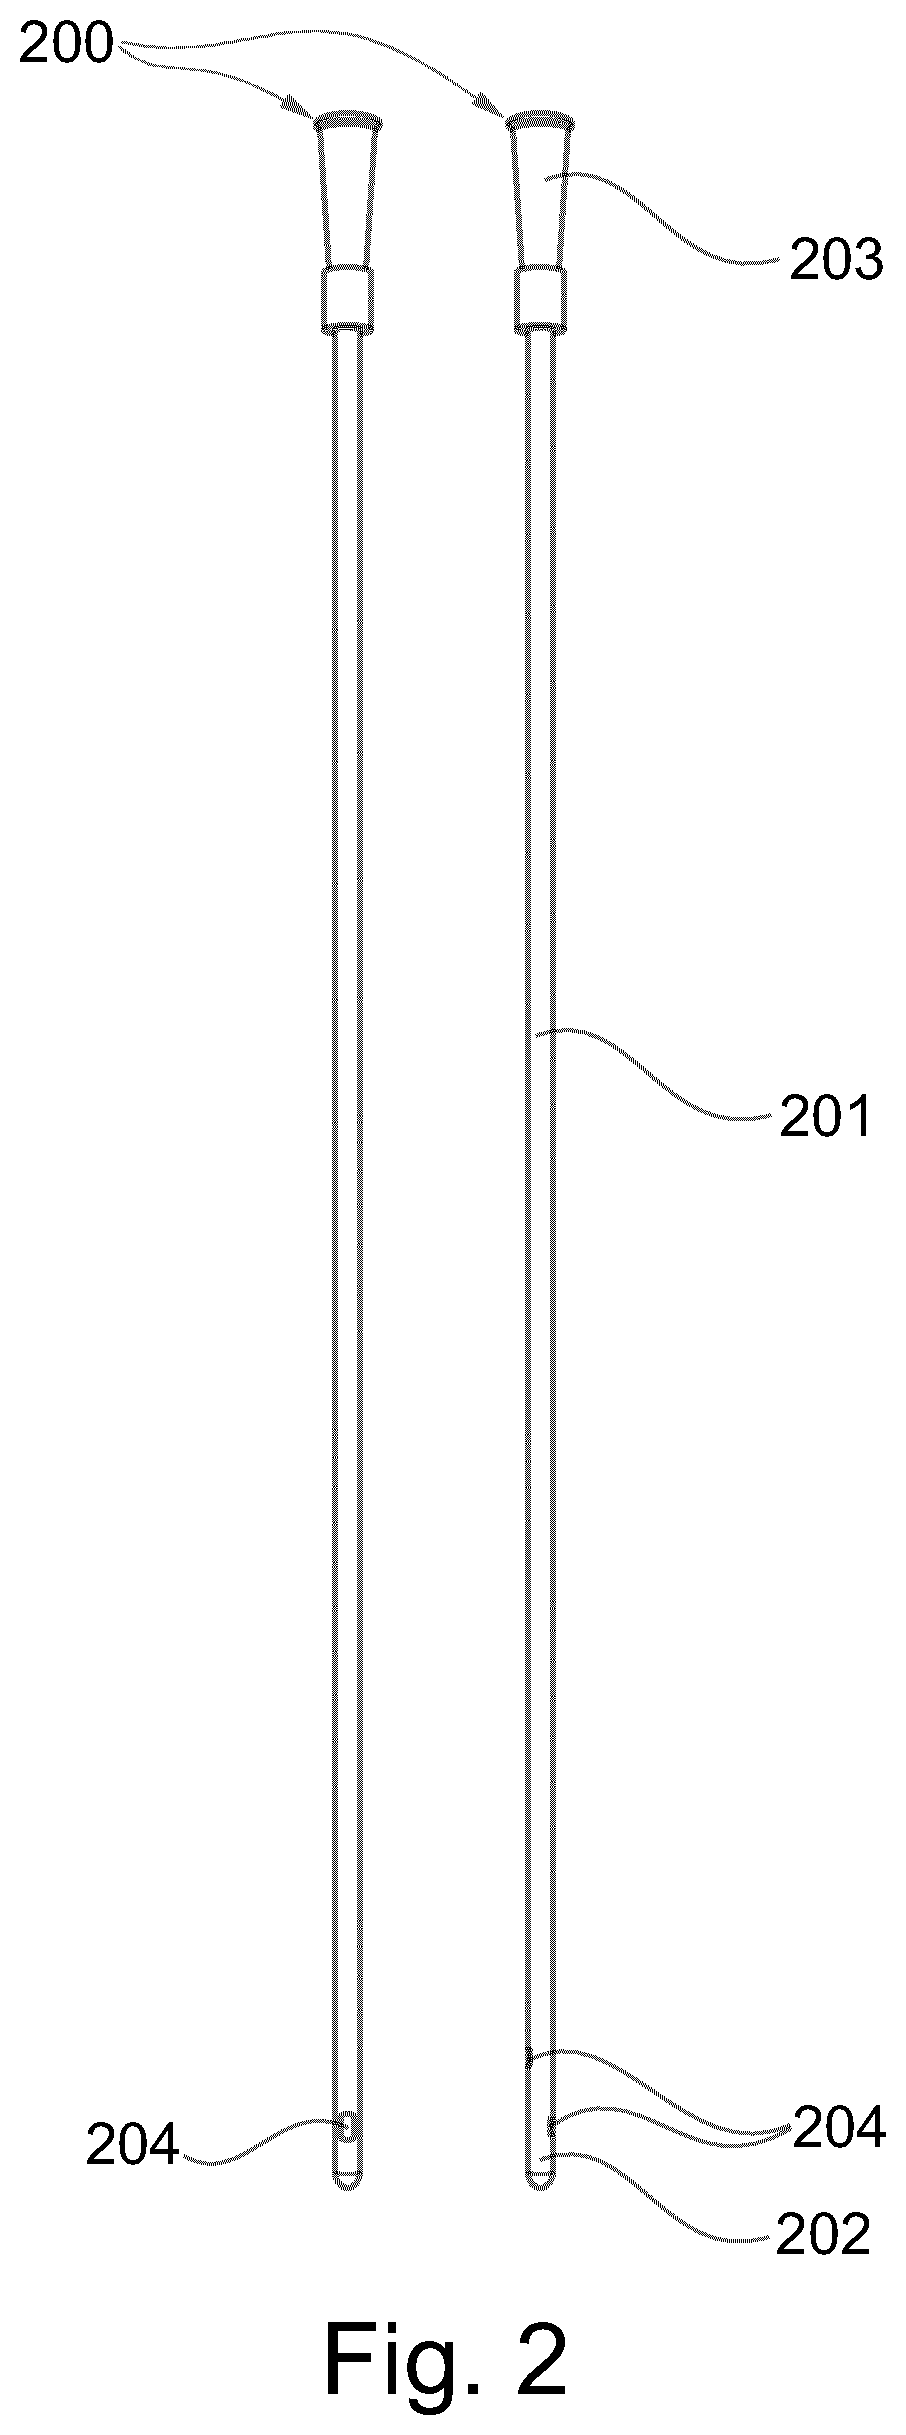 Method for manufacturing of urinary catheters